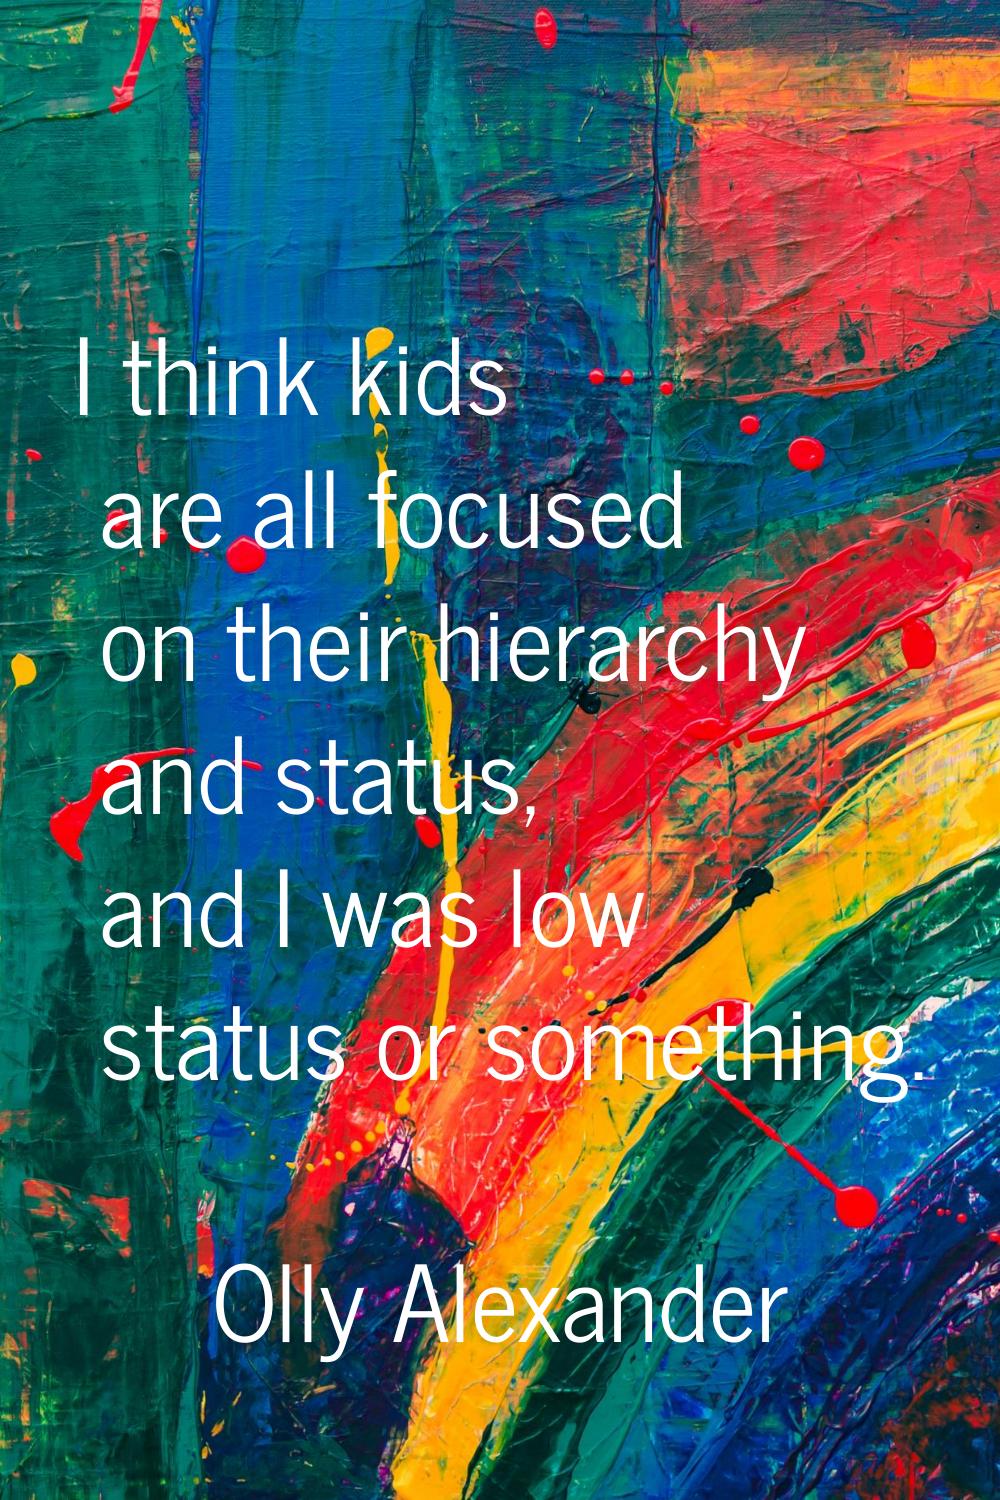 I think kids are all focused on their hierarchy and status, and I was low status or something.